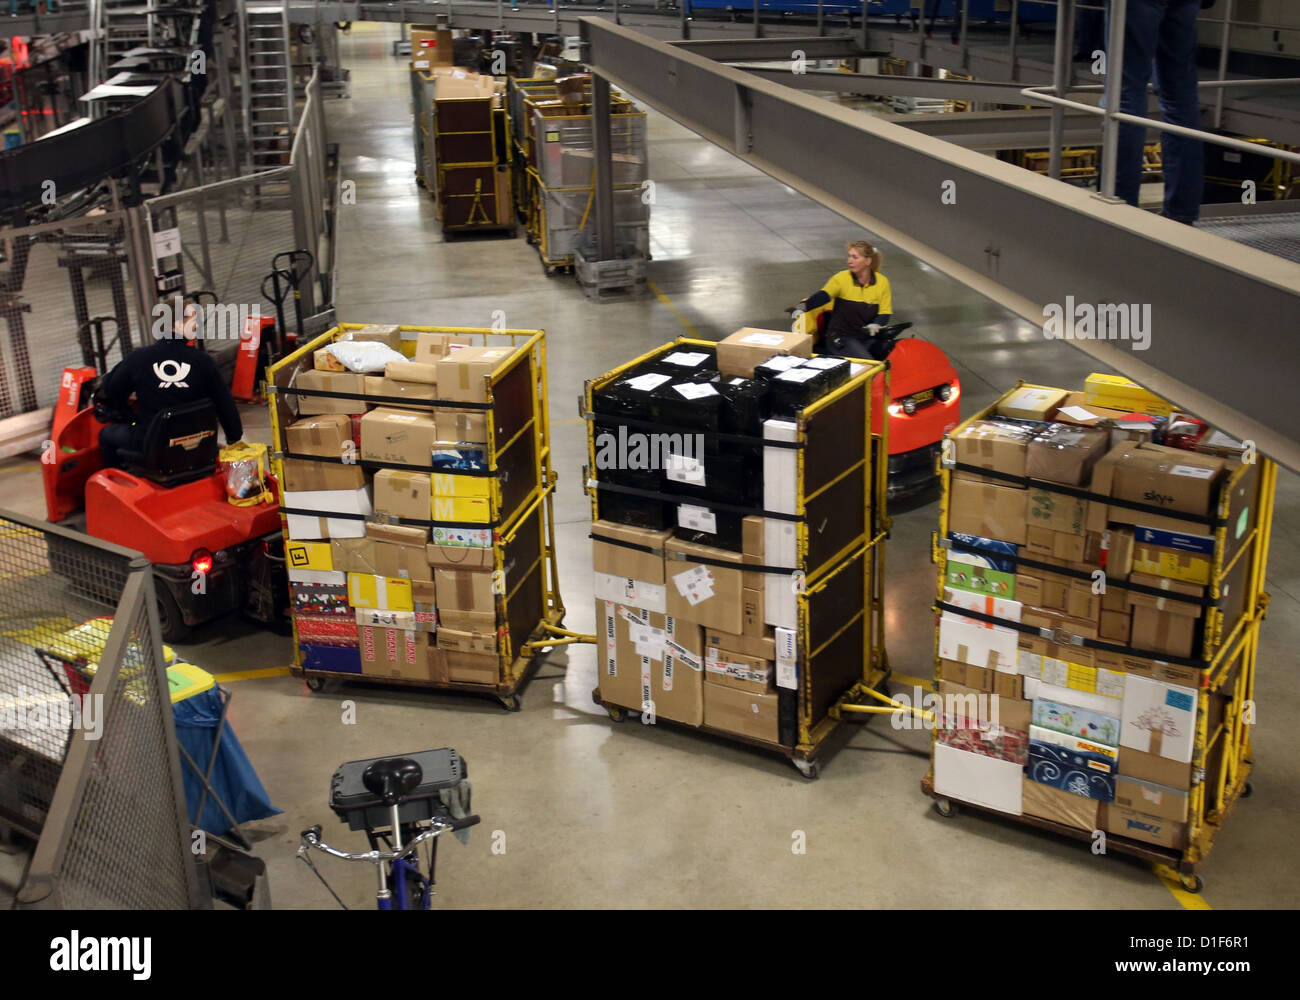 Sorting Area High Resolution Stock Photography and Images - Alamy